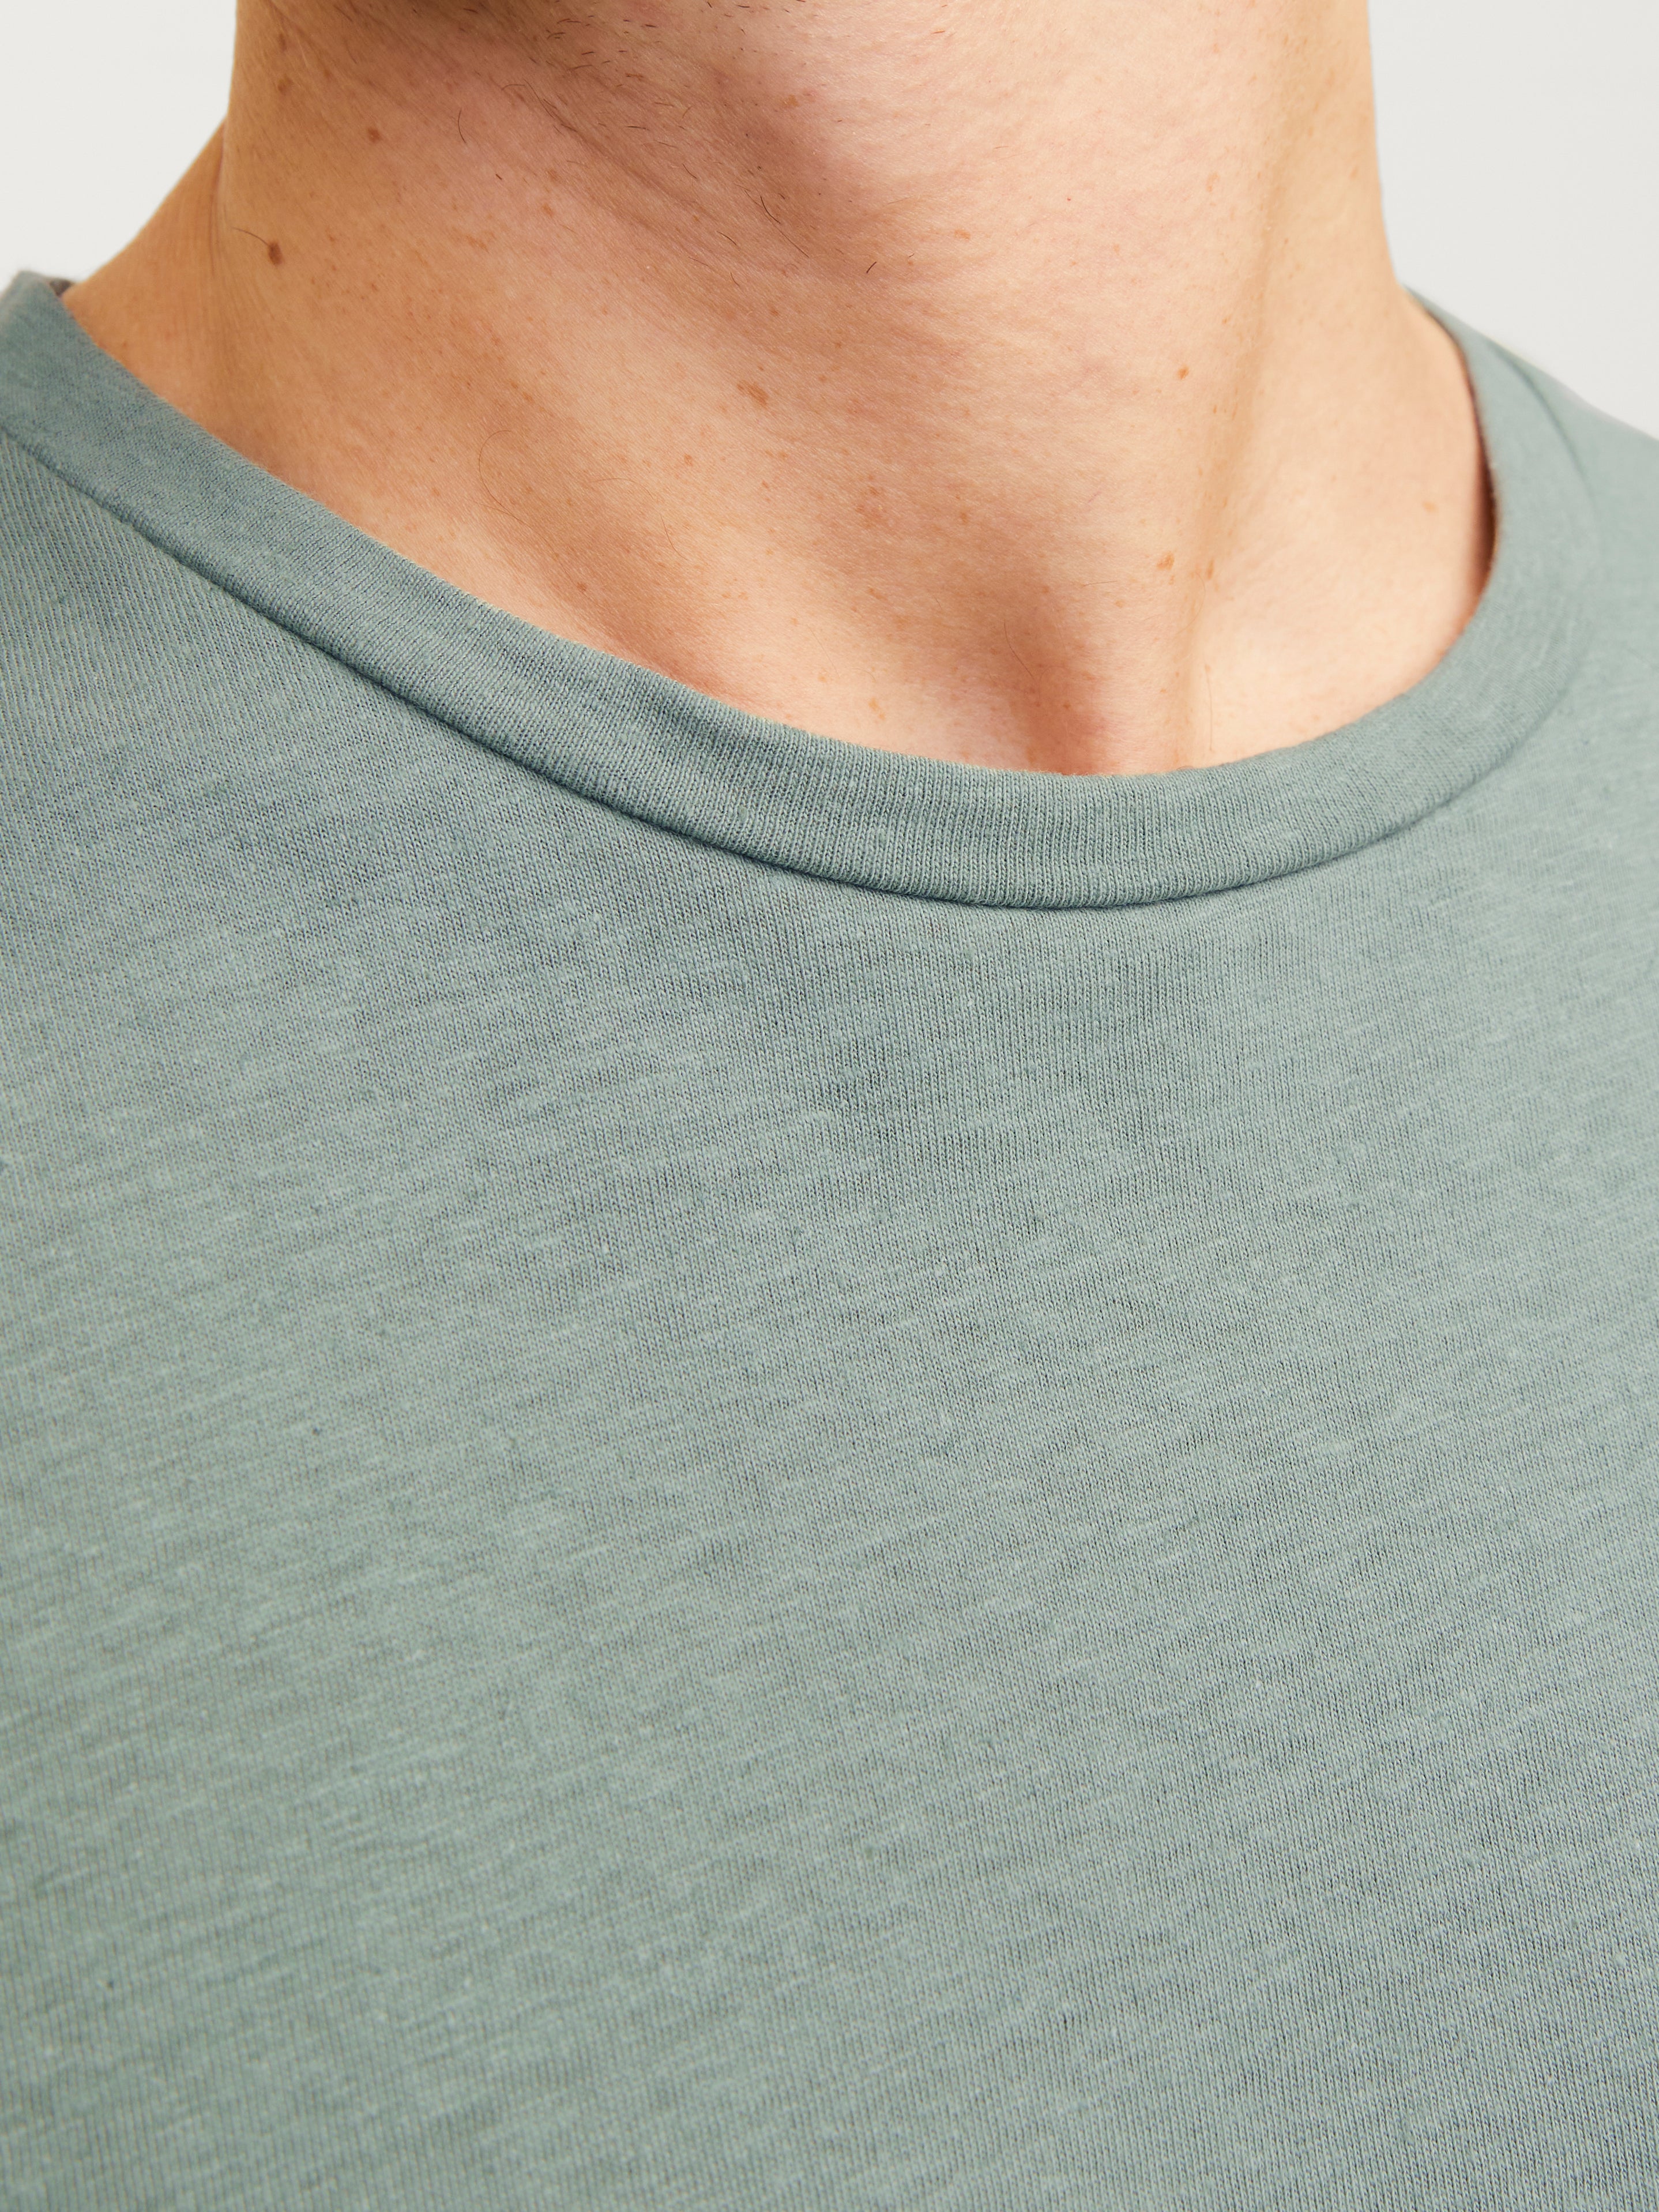 Relaxed Fit Round Neck T-Shirt | Jack & Jones